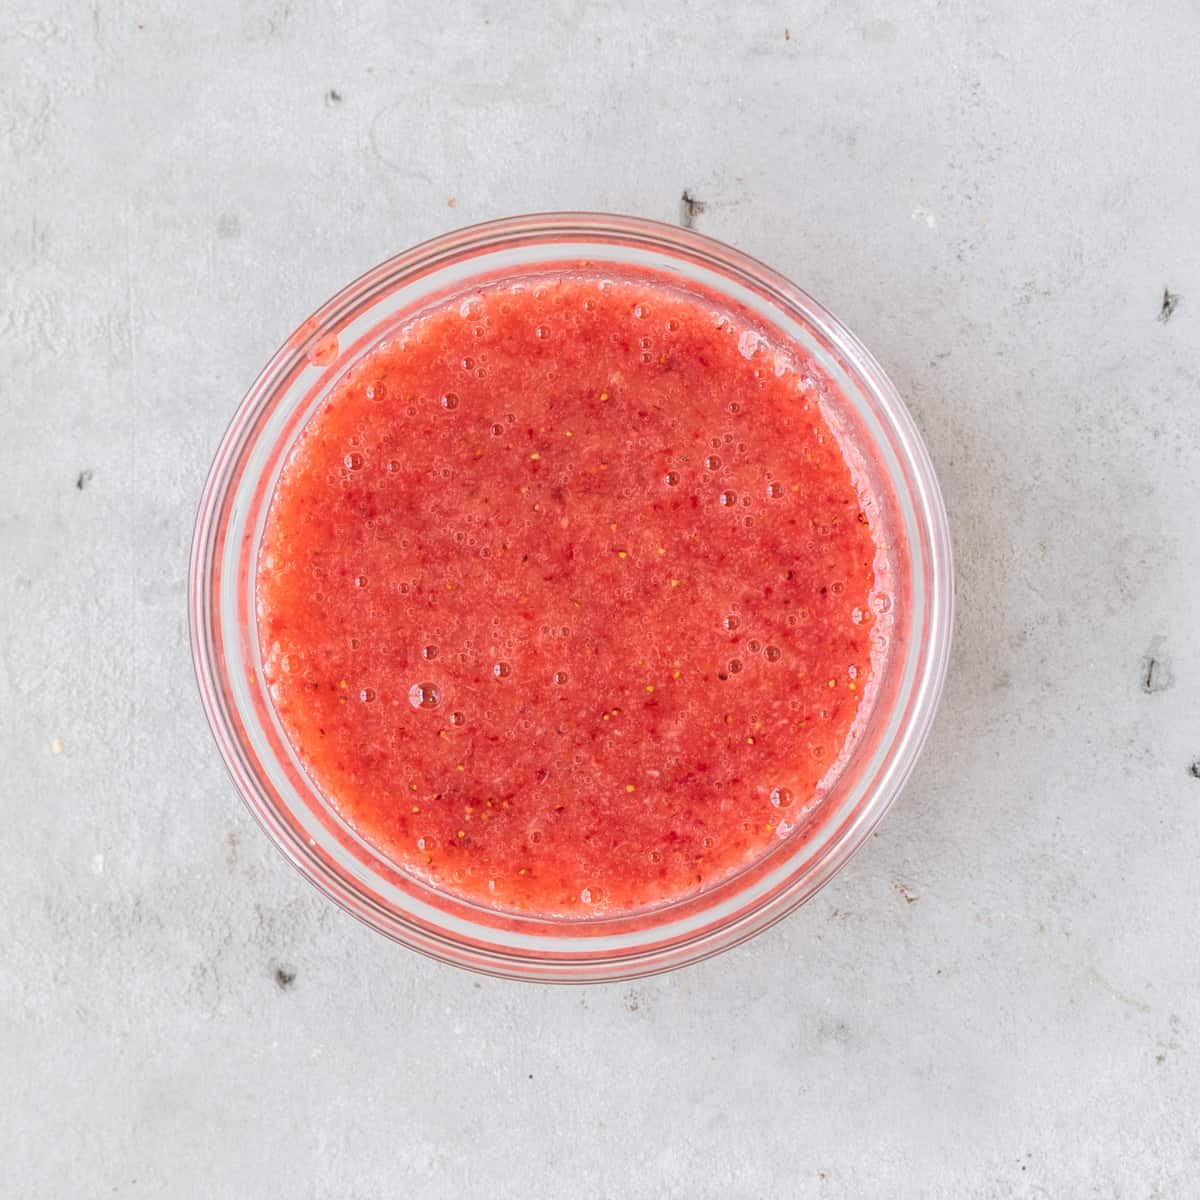 the strawberry sauce in a glass bowl on a grey background